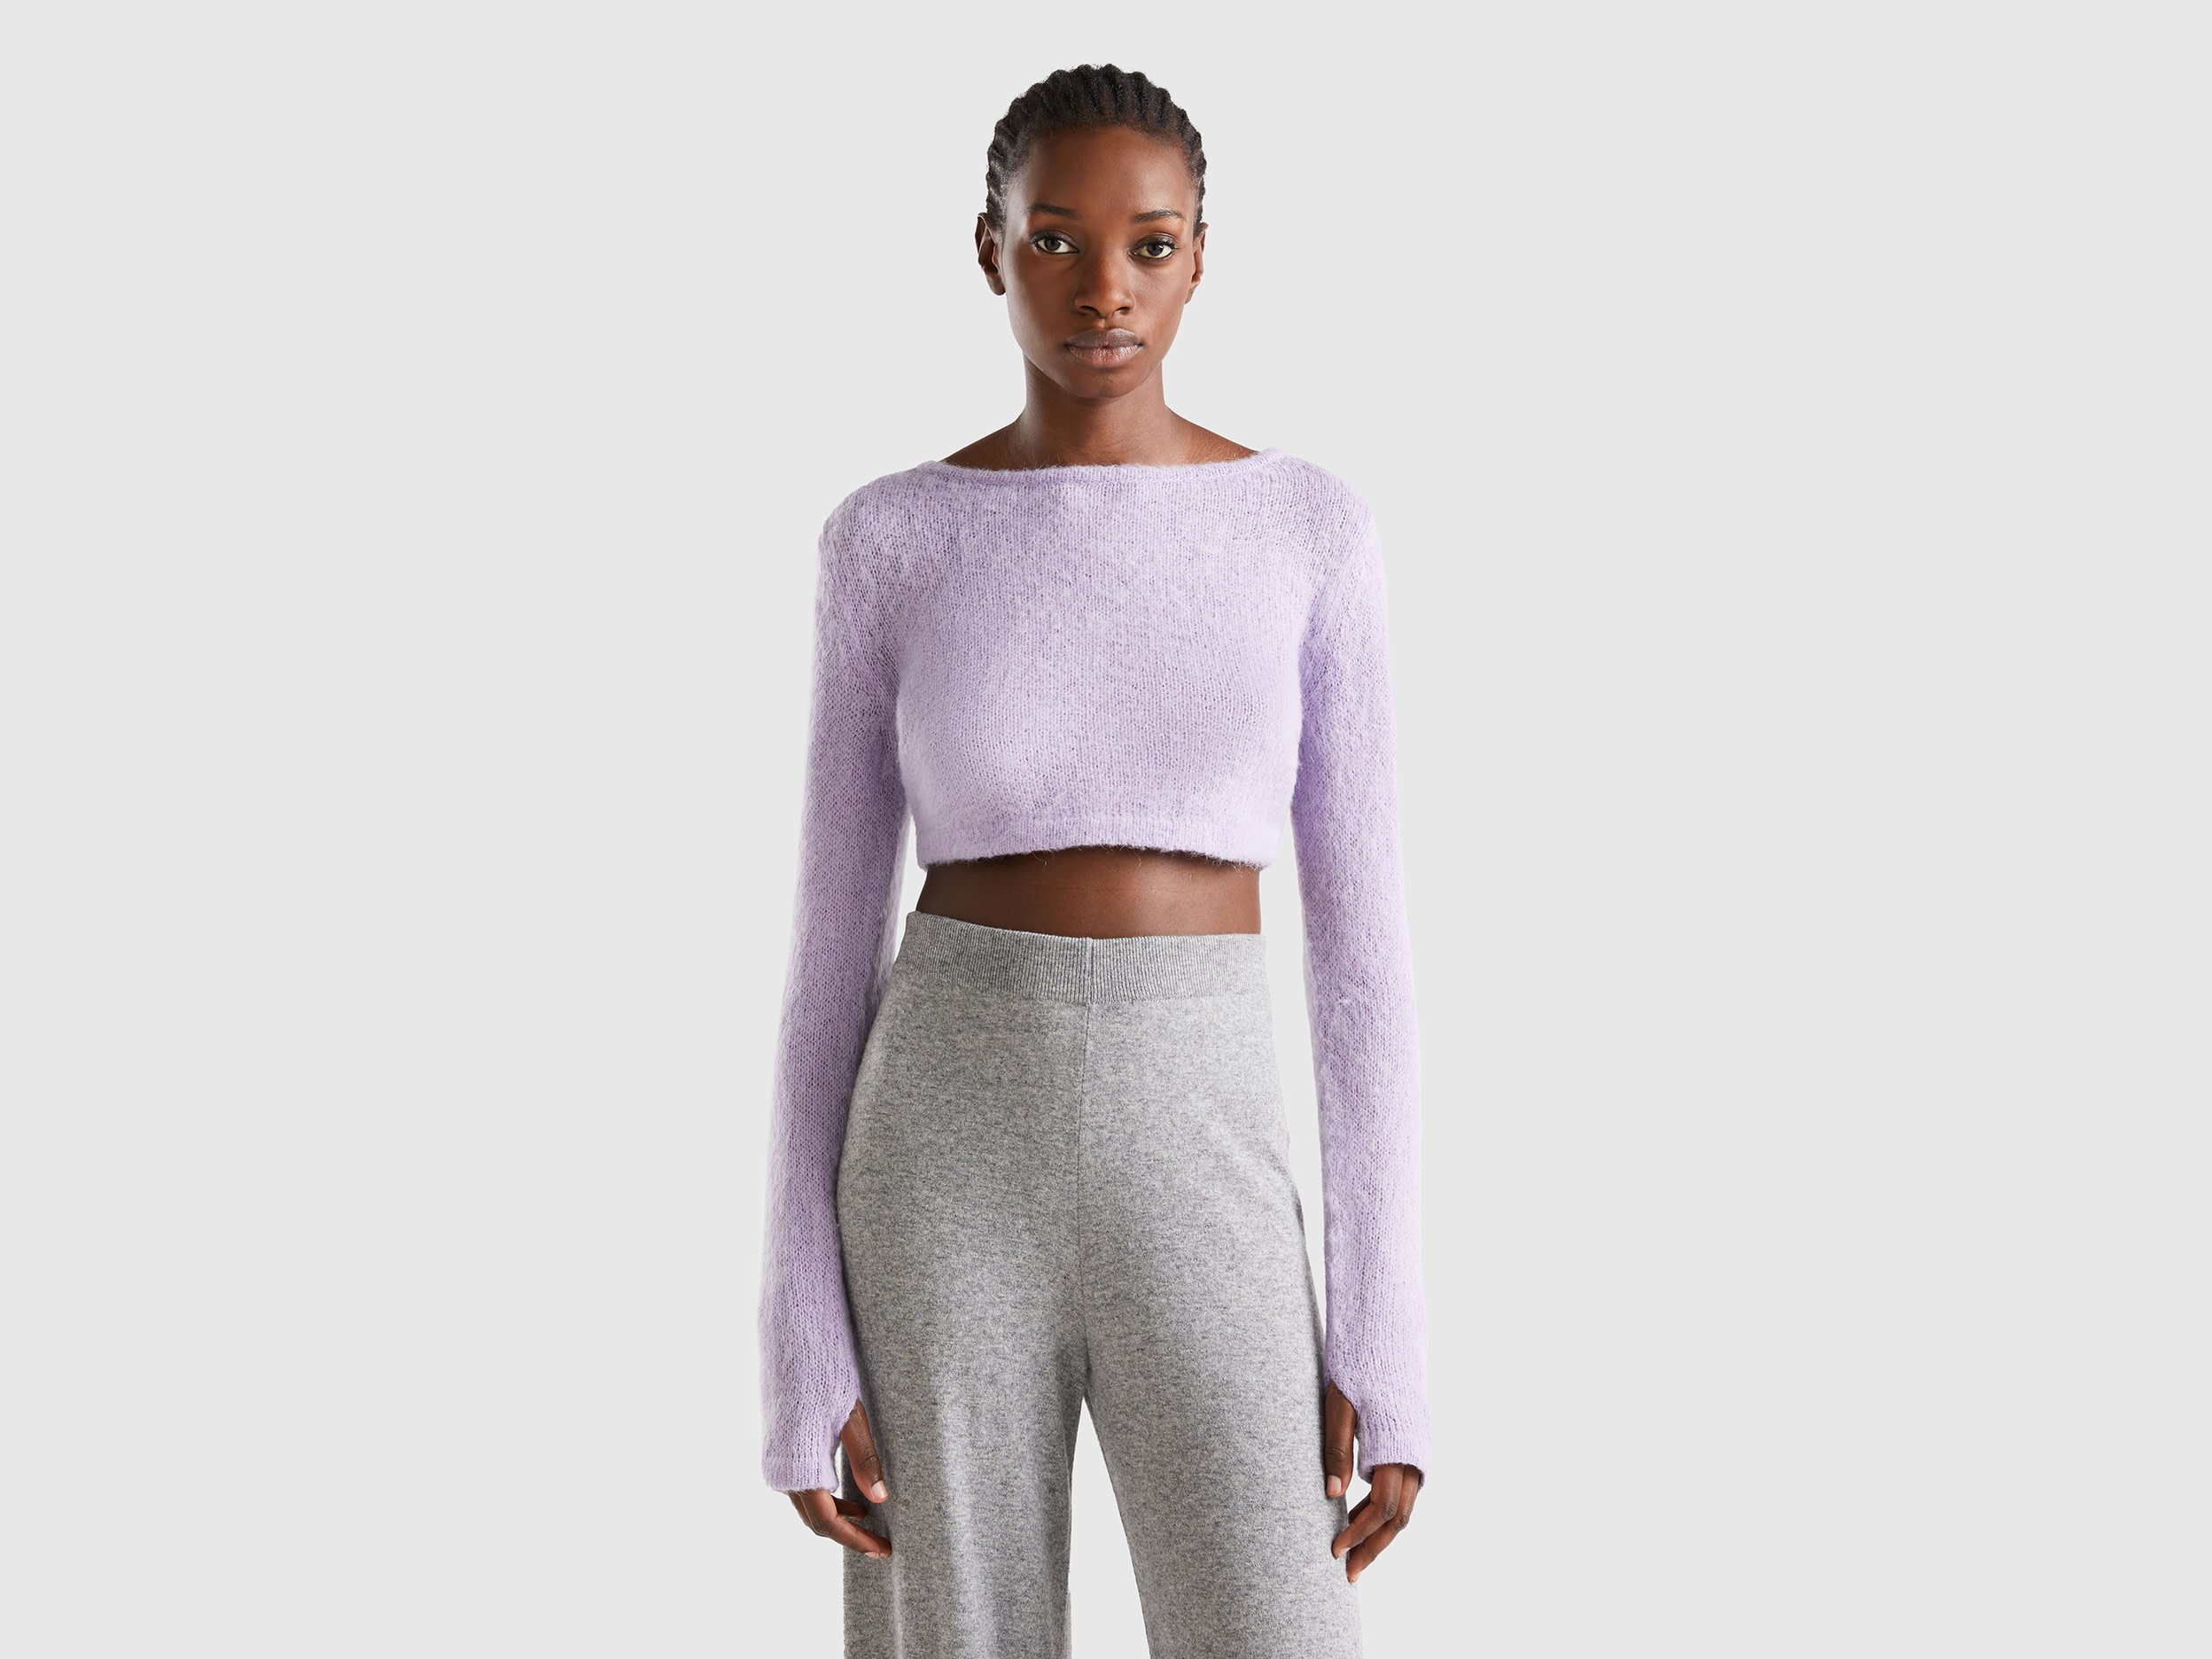 Benetton, Cropped Sweater In Mohair Blend, size L-XL, Lilac, Women